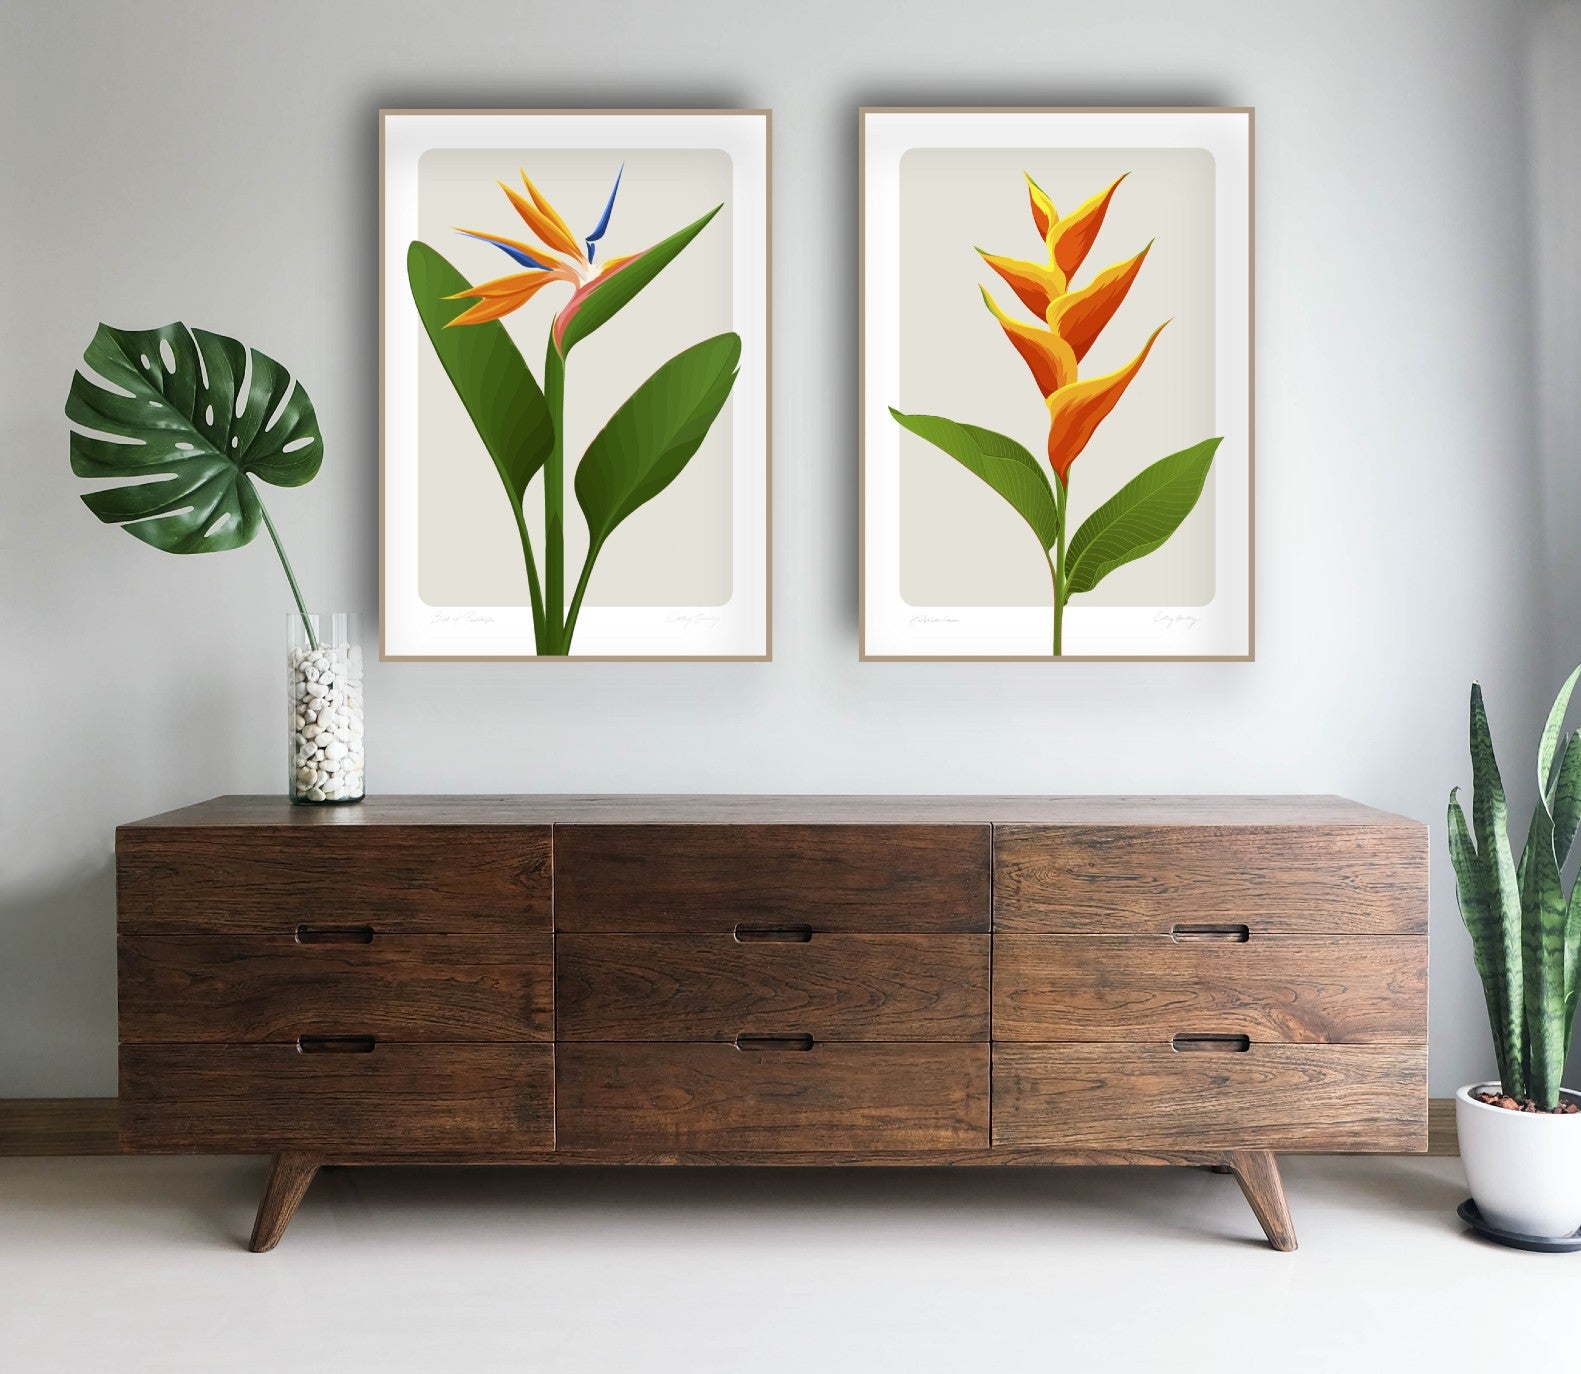 Framed art prints by Hansby Design New Zealand, featuring the Bird of Paradise and Heliconia flowers.